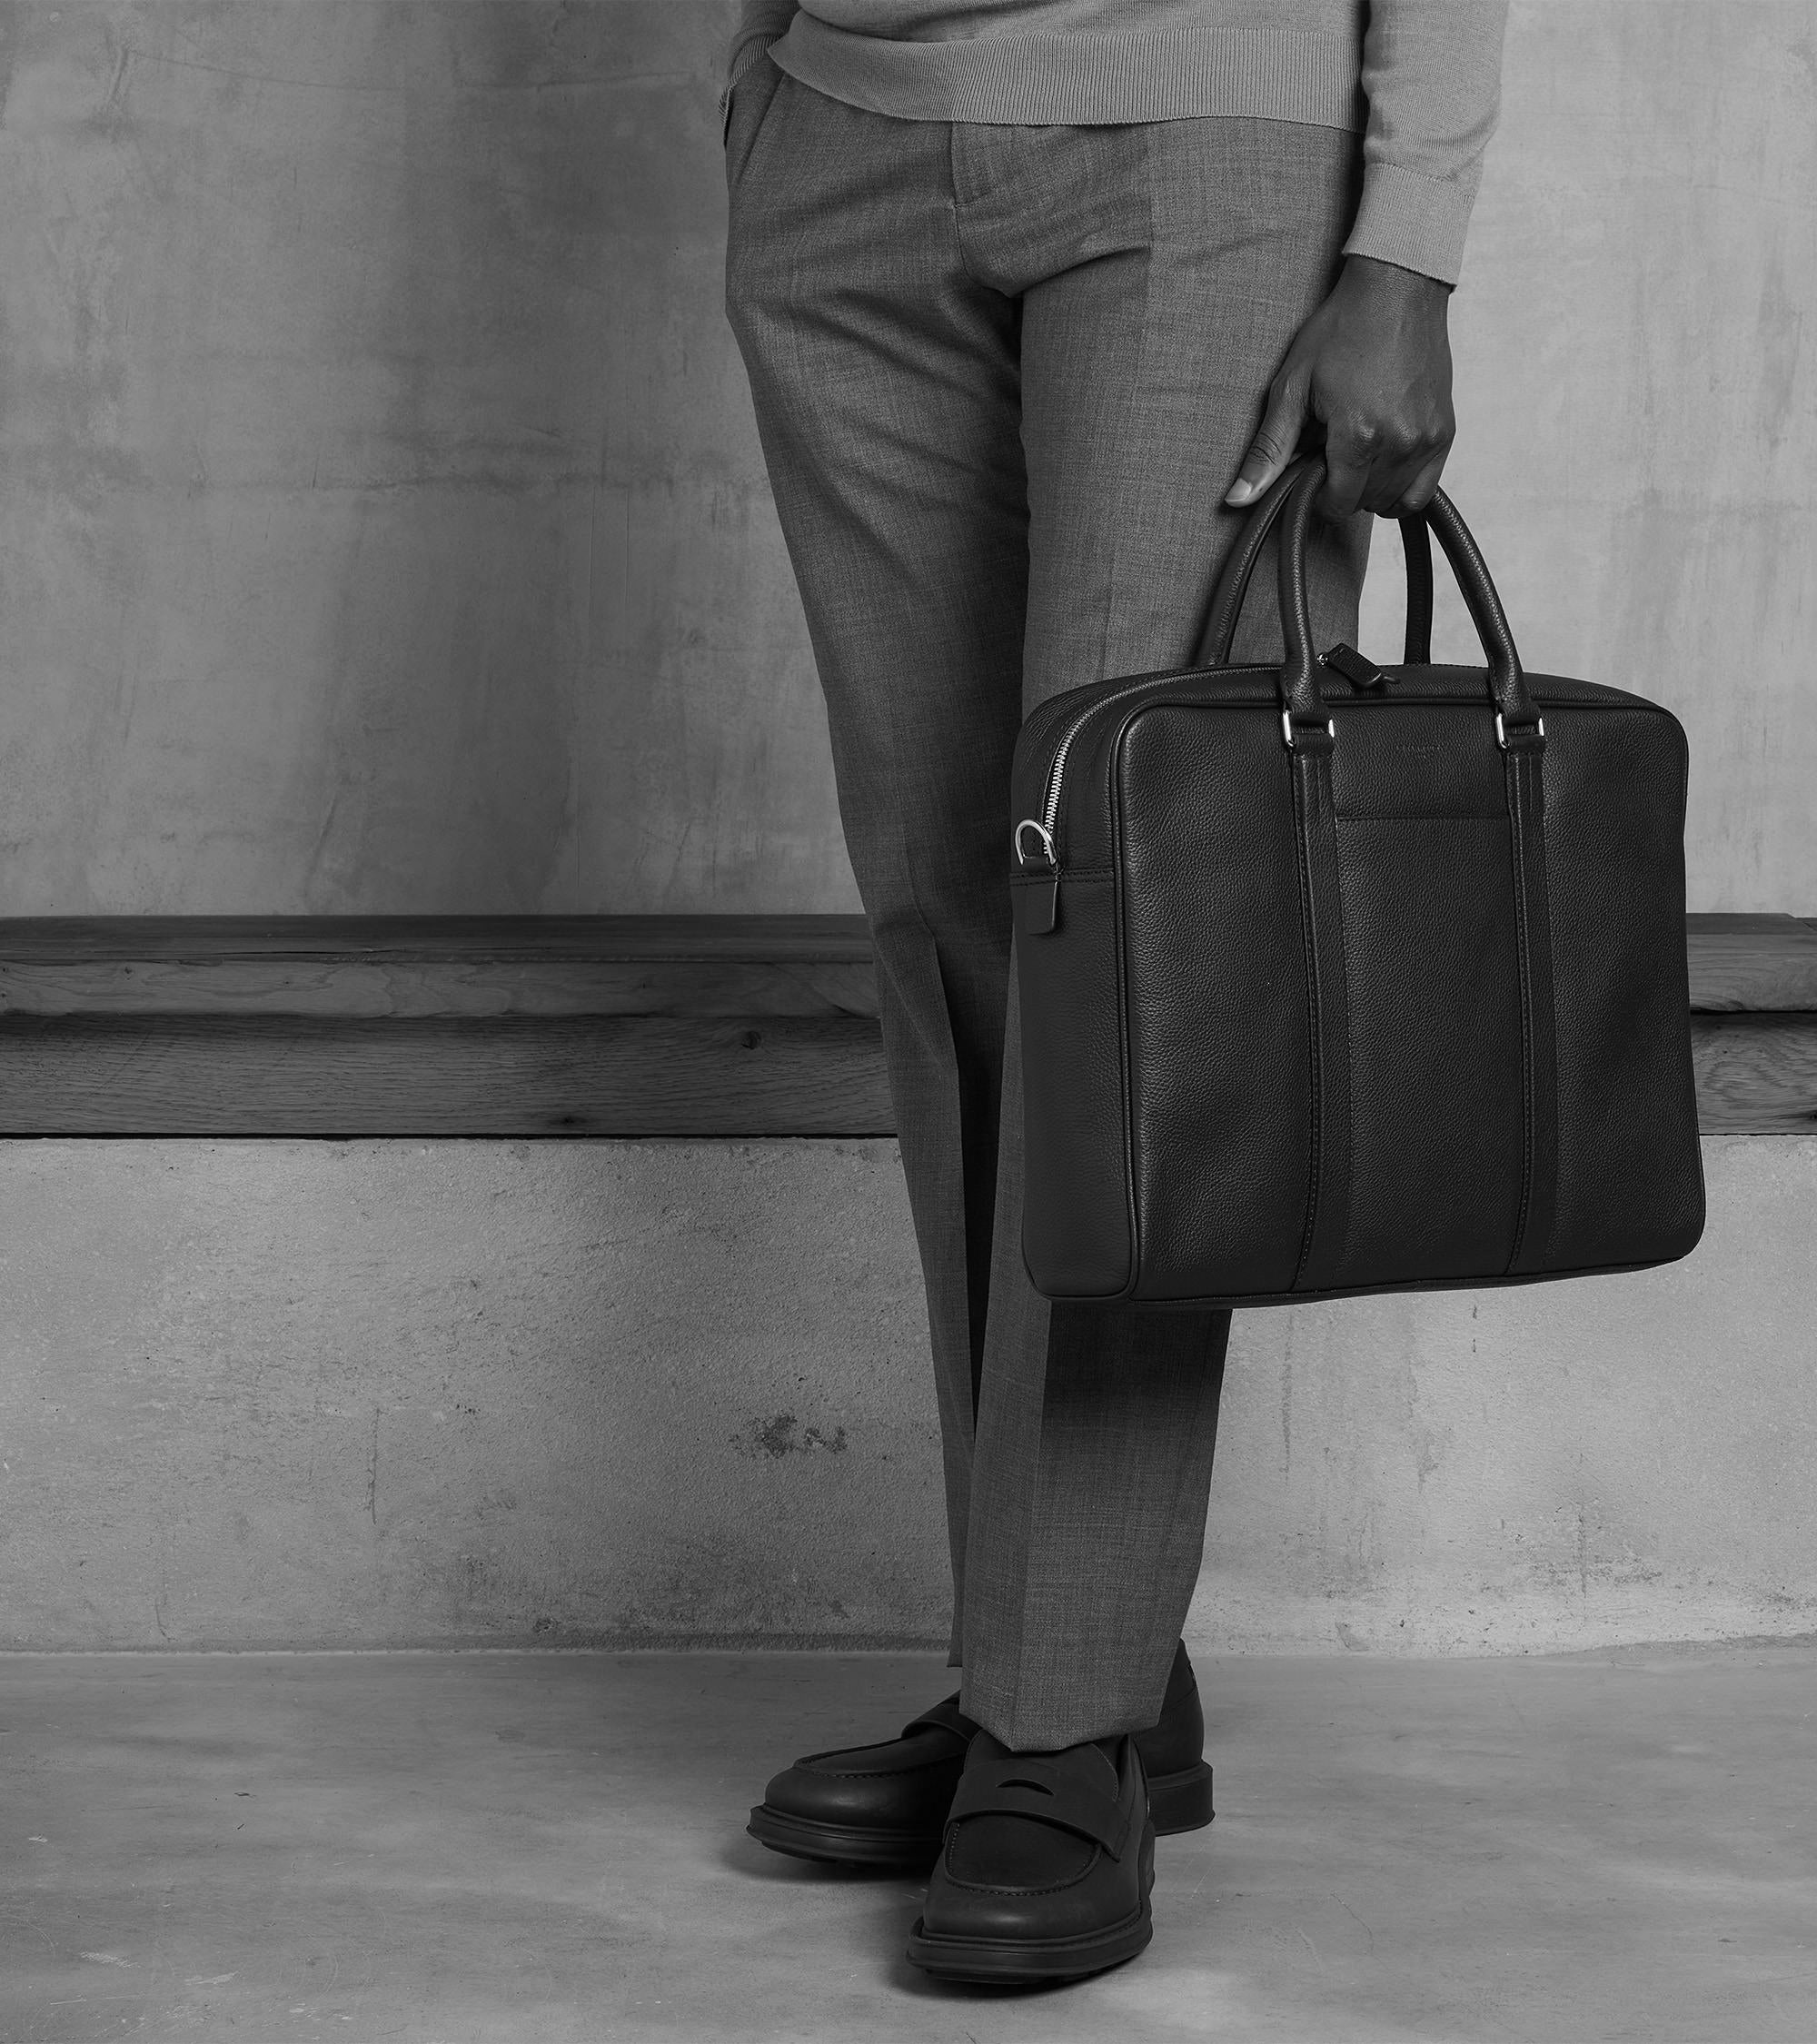 Charles 15" briefcase with 3 gussets in grained leather